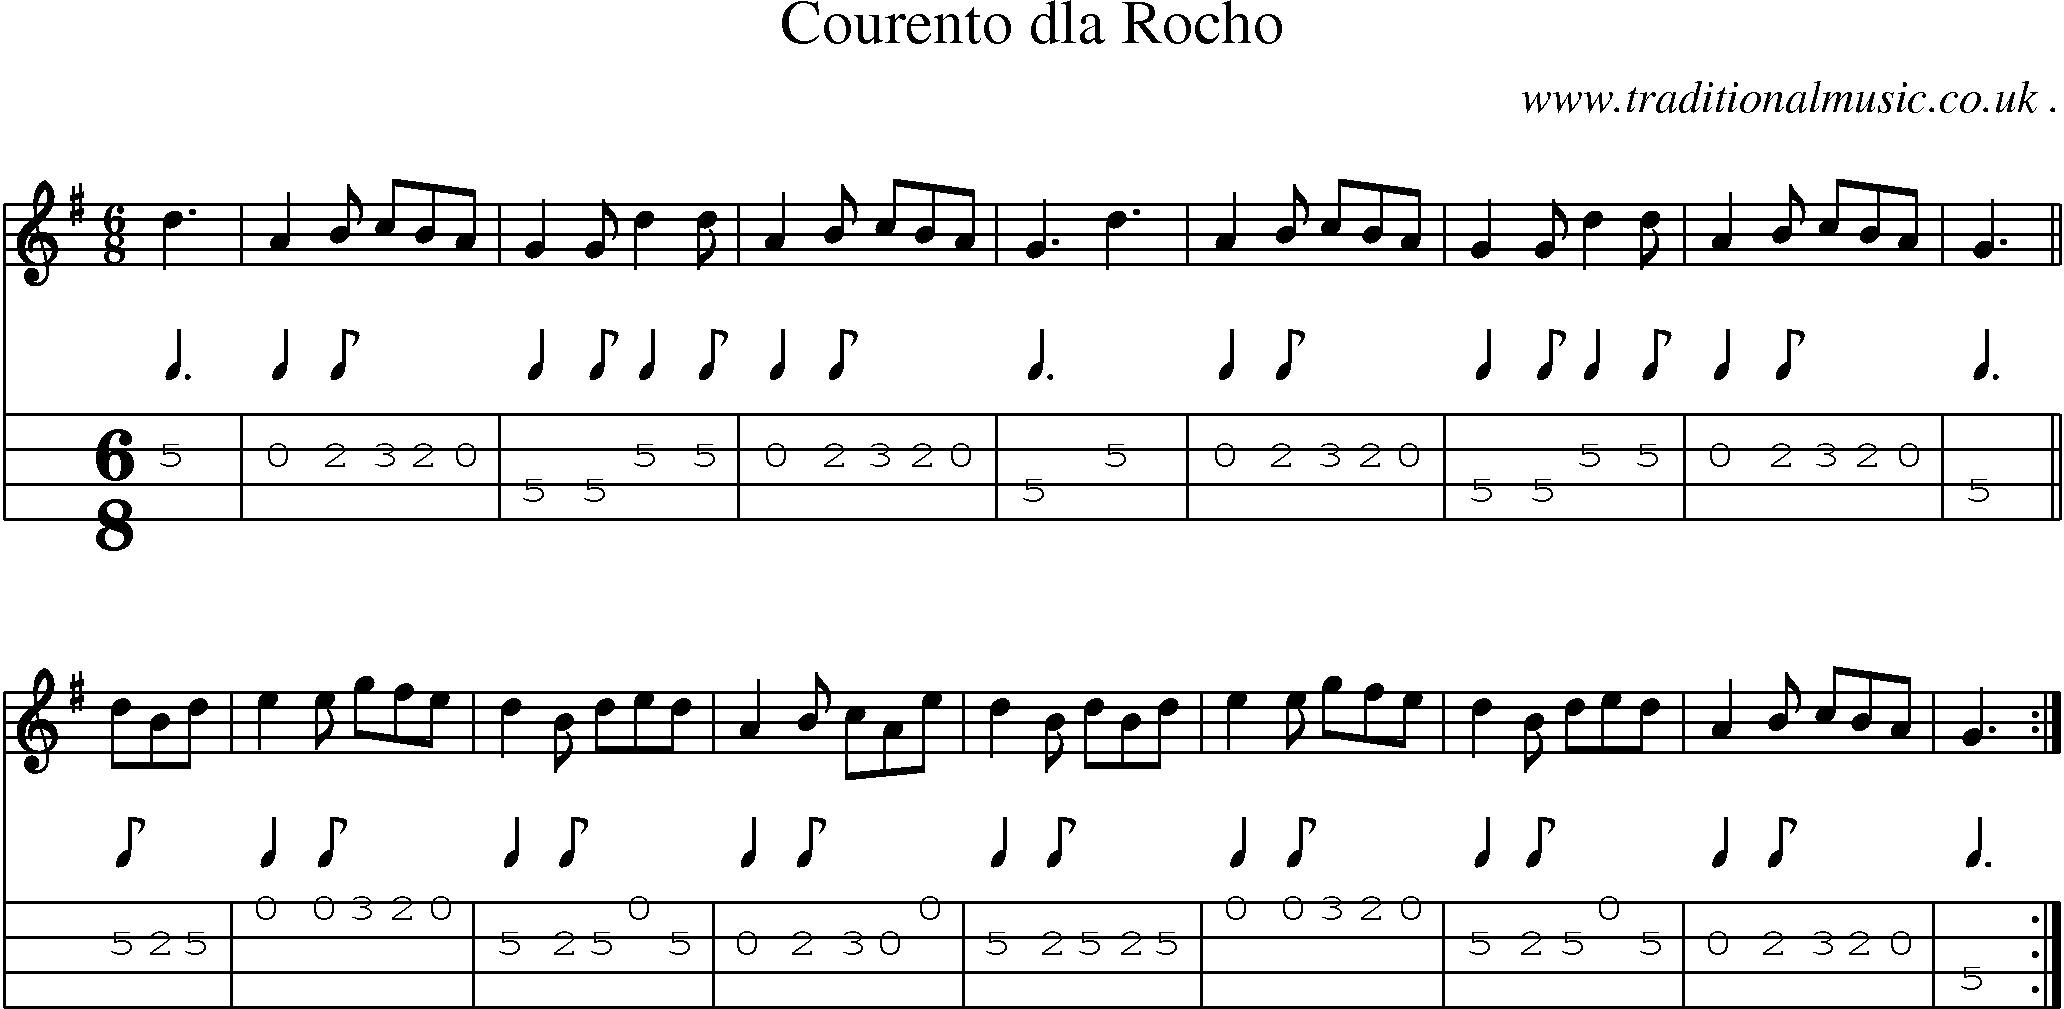 Sheet-Music and Mandolin Tabs for Courento Dla Rocho